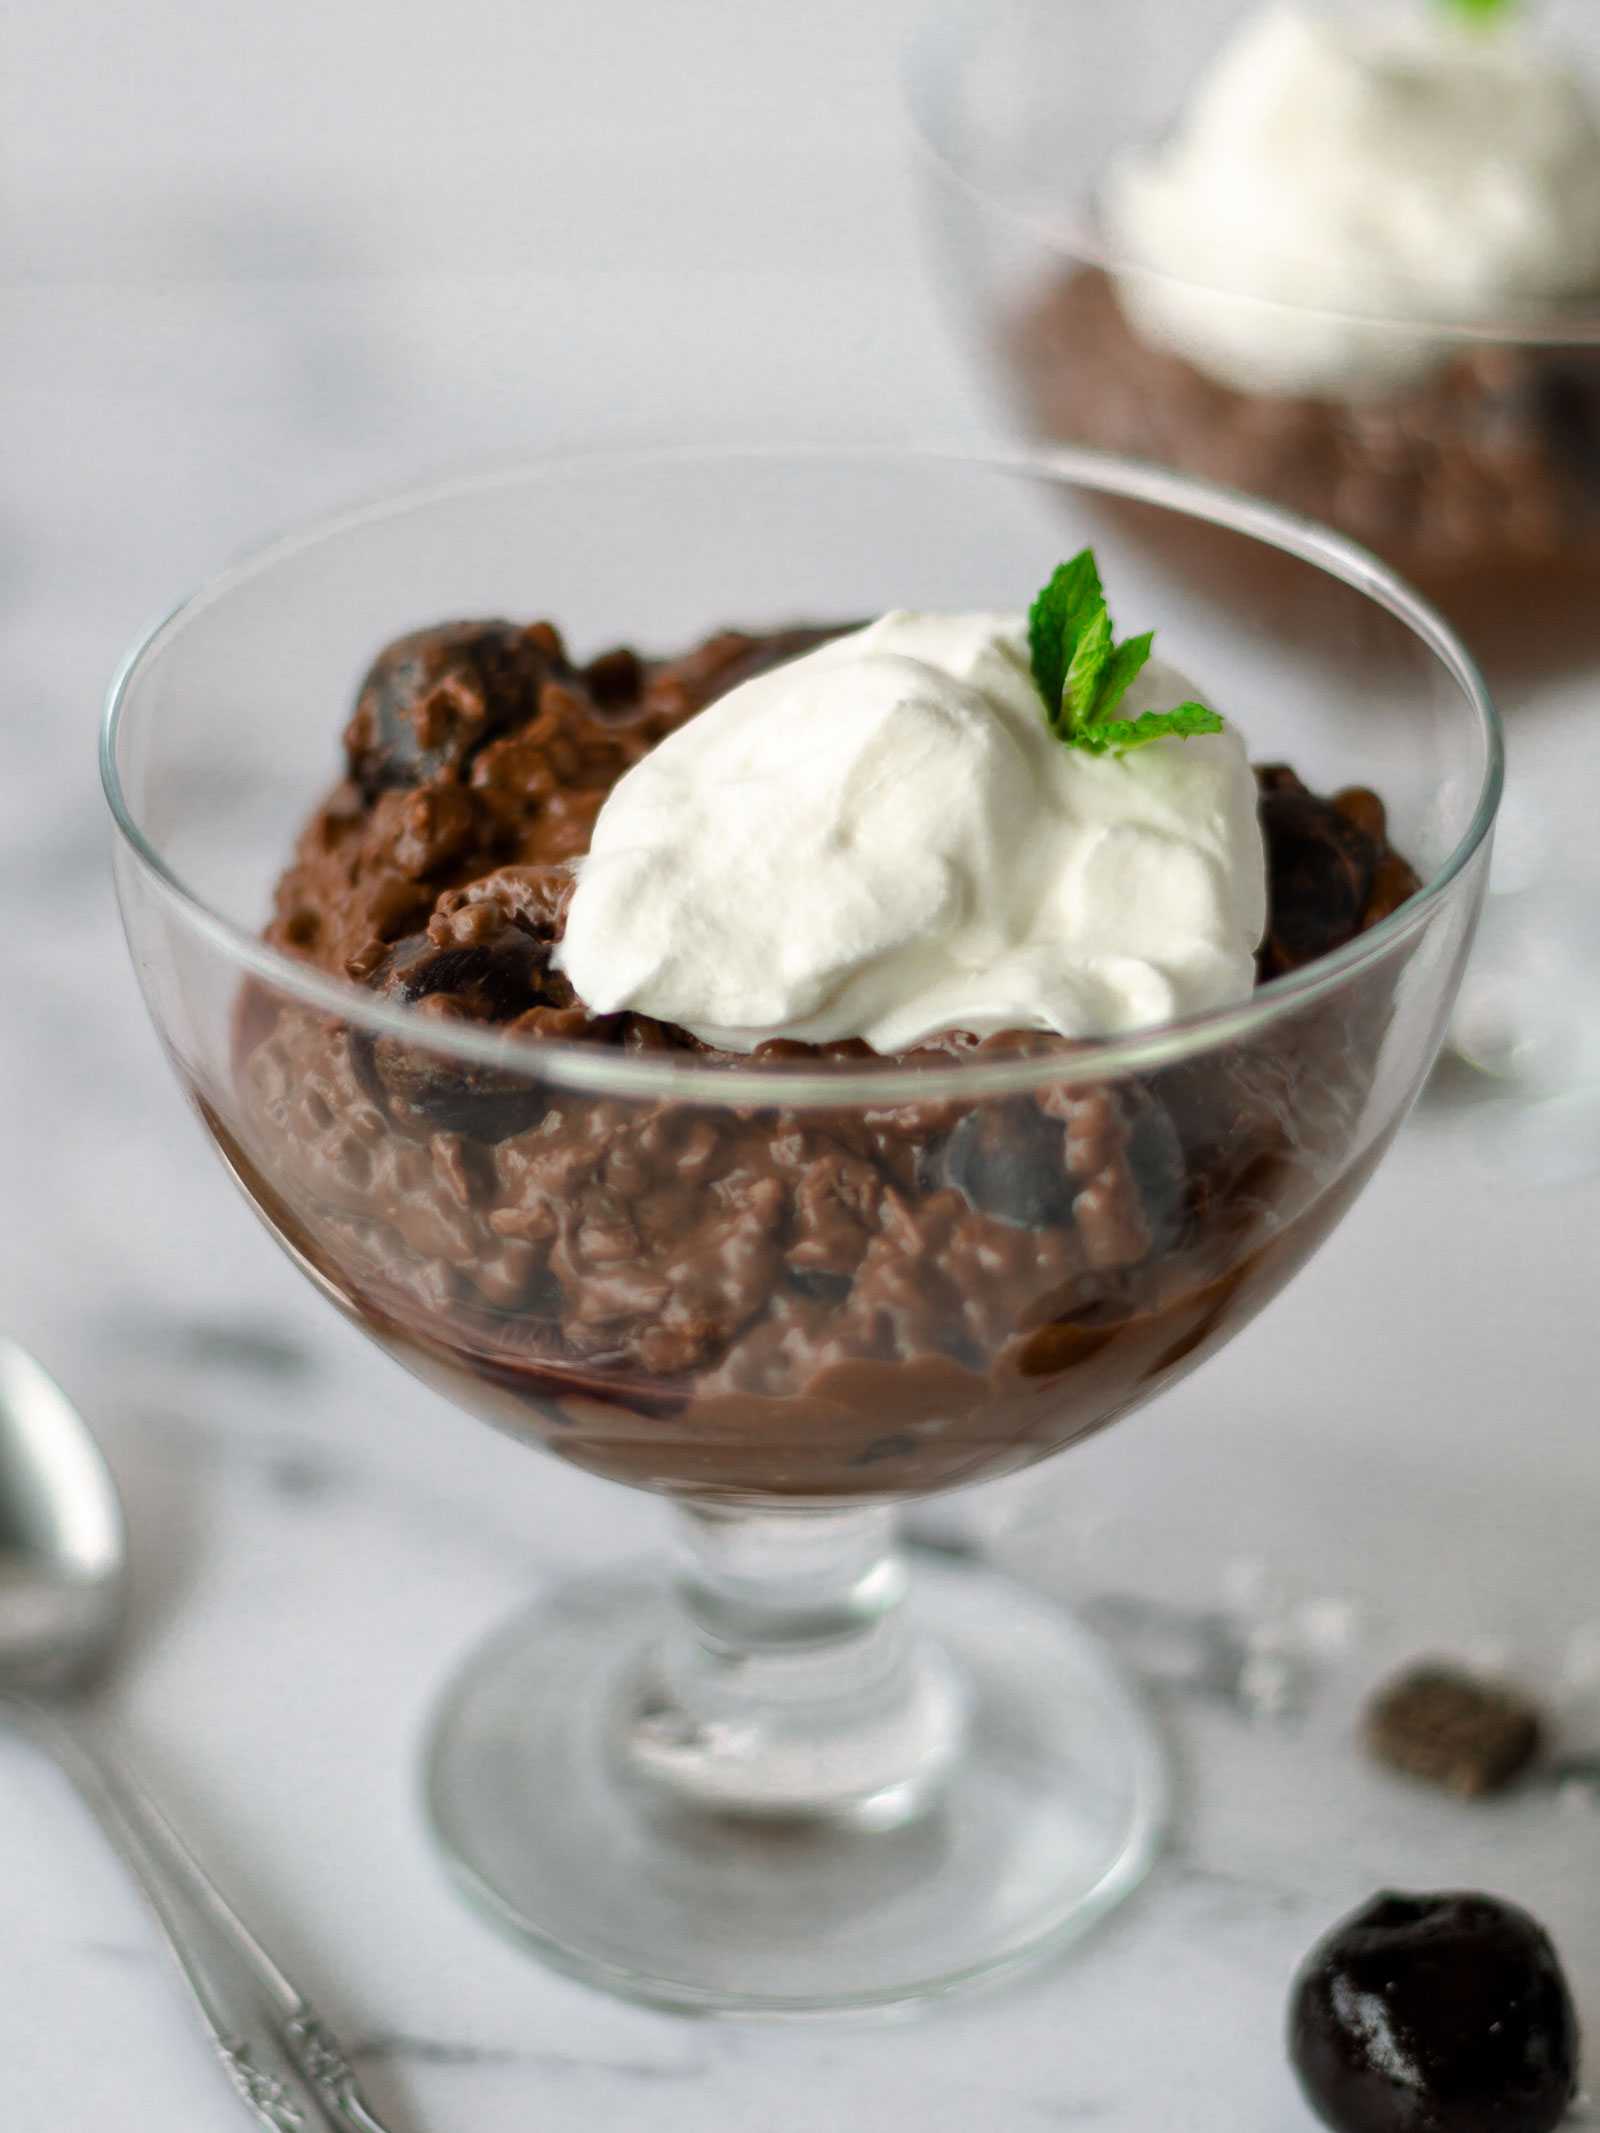 Image of a serving of Chocolate Cherry Chia Puddling in a glass cup, with a dollop of whip cream on top. This is a healthy dessert or breakfast on the go. This delicious combination of chia seeds, cherries, and dark chocolate is not only healthy but quite decadent.